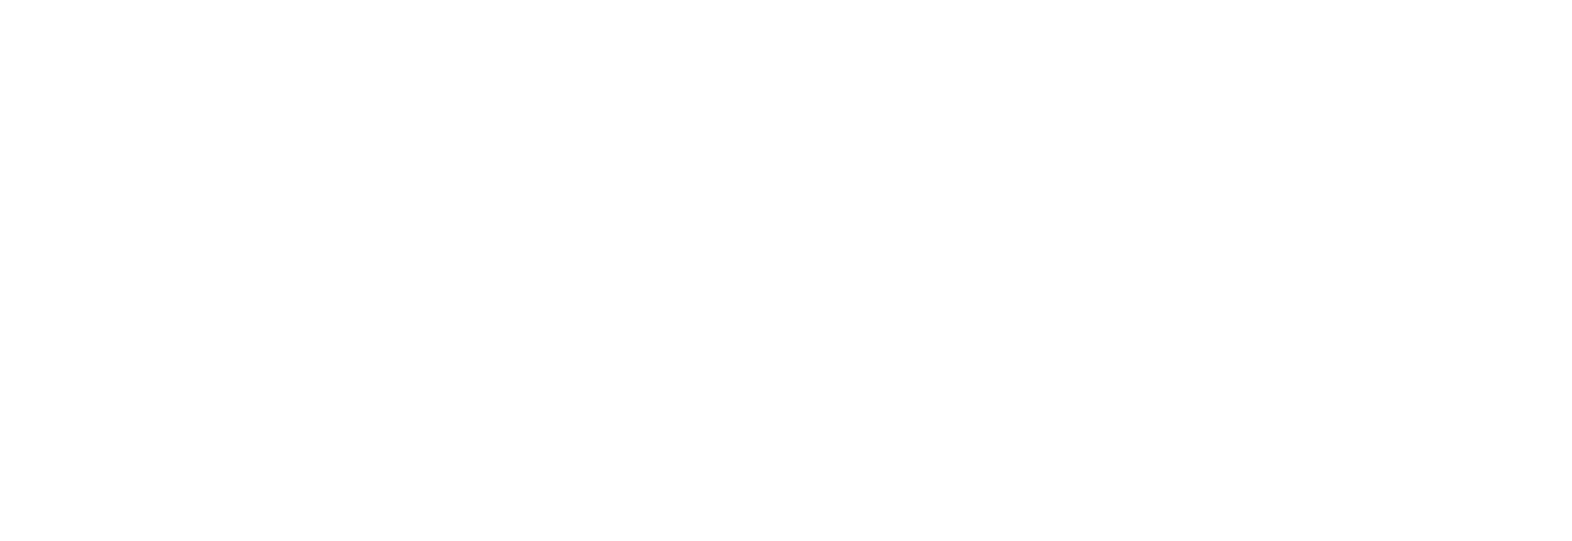 The Toy Talk Guys Blog and Podcast